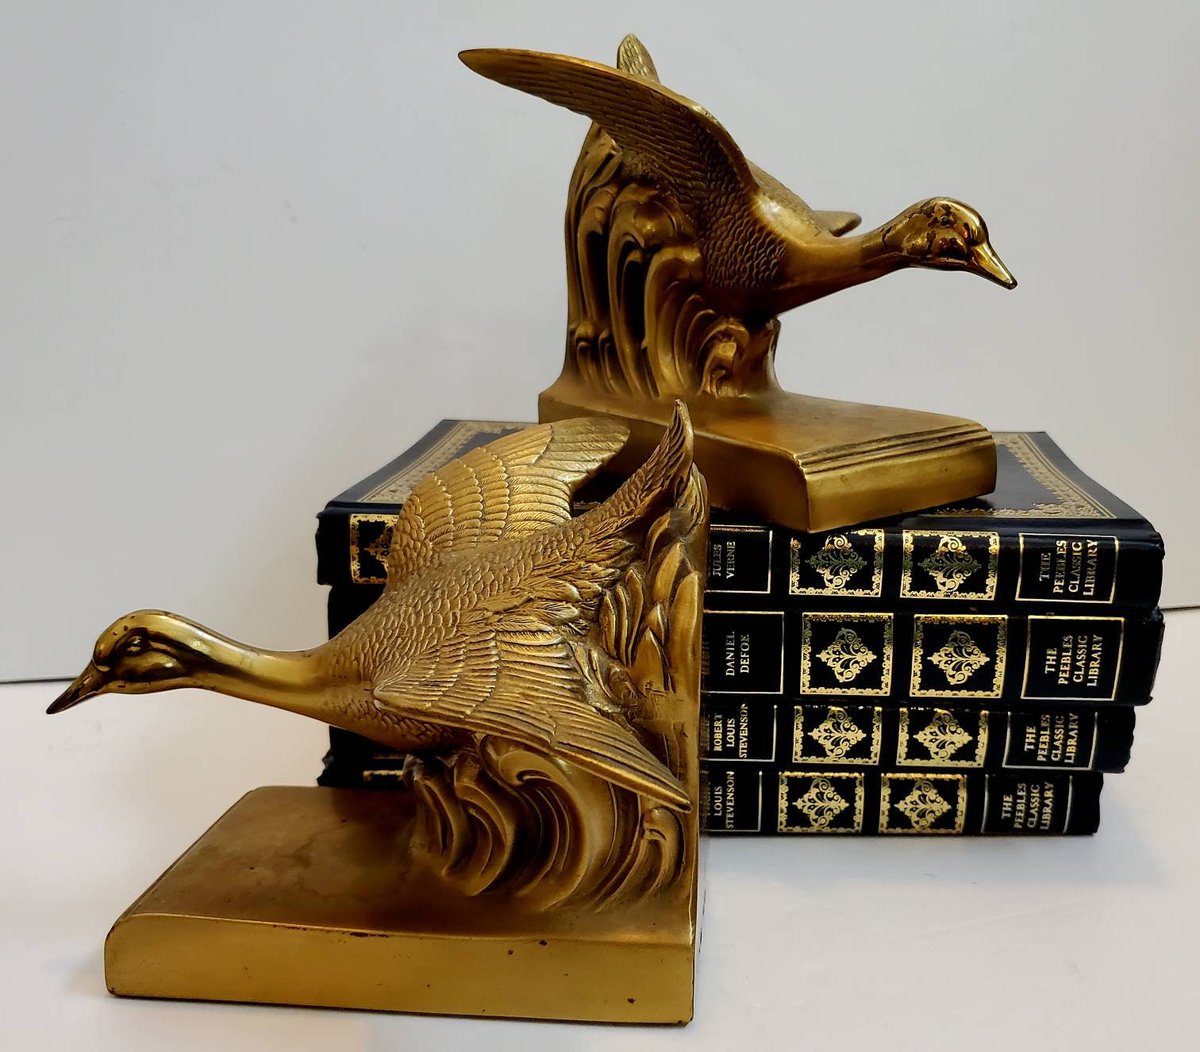 Beautiful vintage bookends perfect for any decor setting aycarambagifts.etsy.com/listing/128150… #BeautifulHomes #housebeautiful #giftforbibliophile #books #designelements #homeaccents #shopsmall #imaginationssoar #etsygifts #athomewithbooks #birds